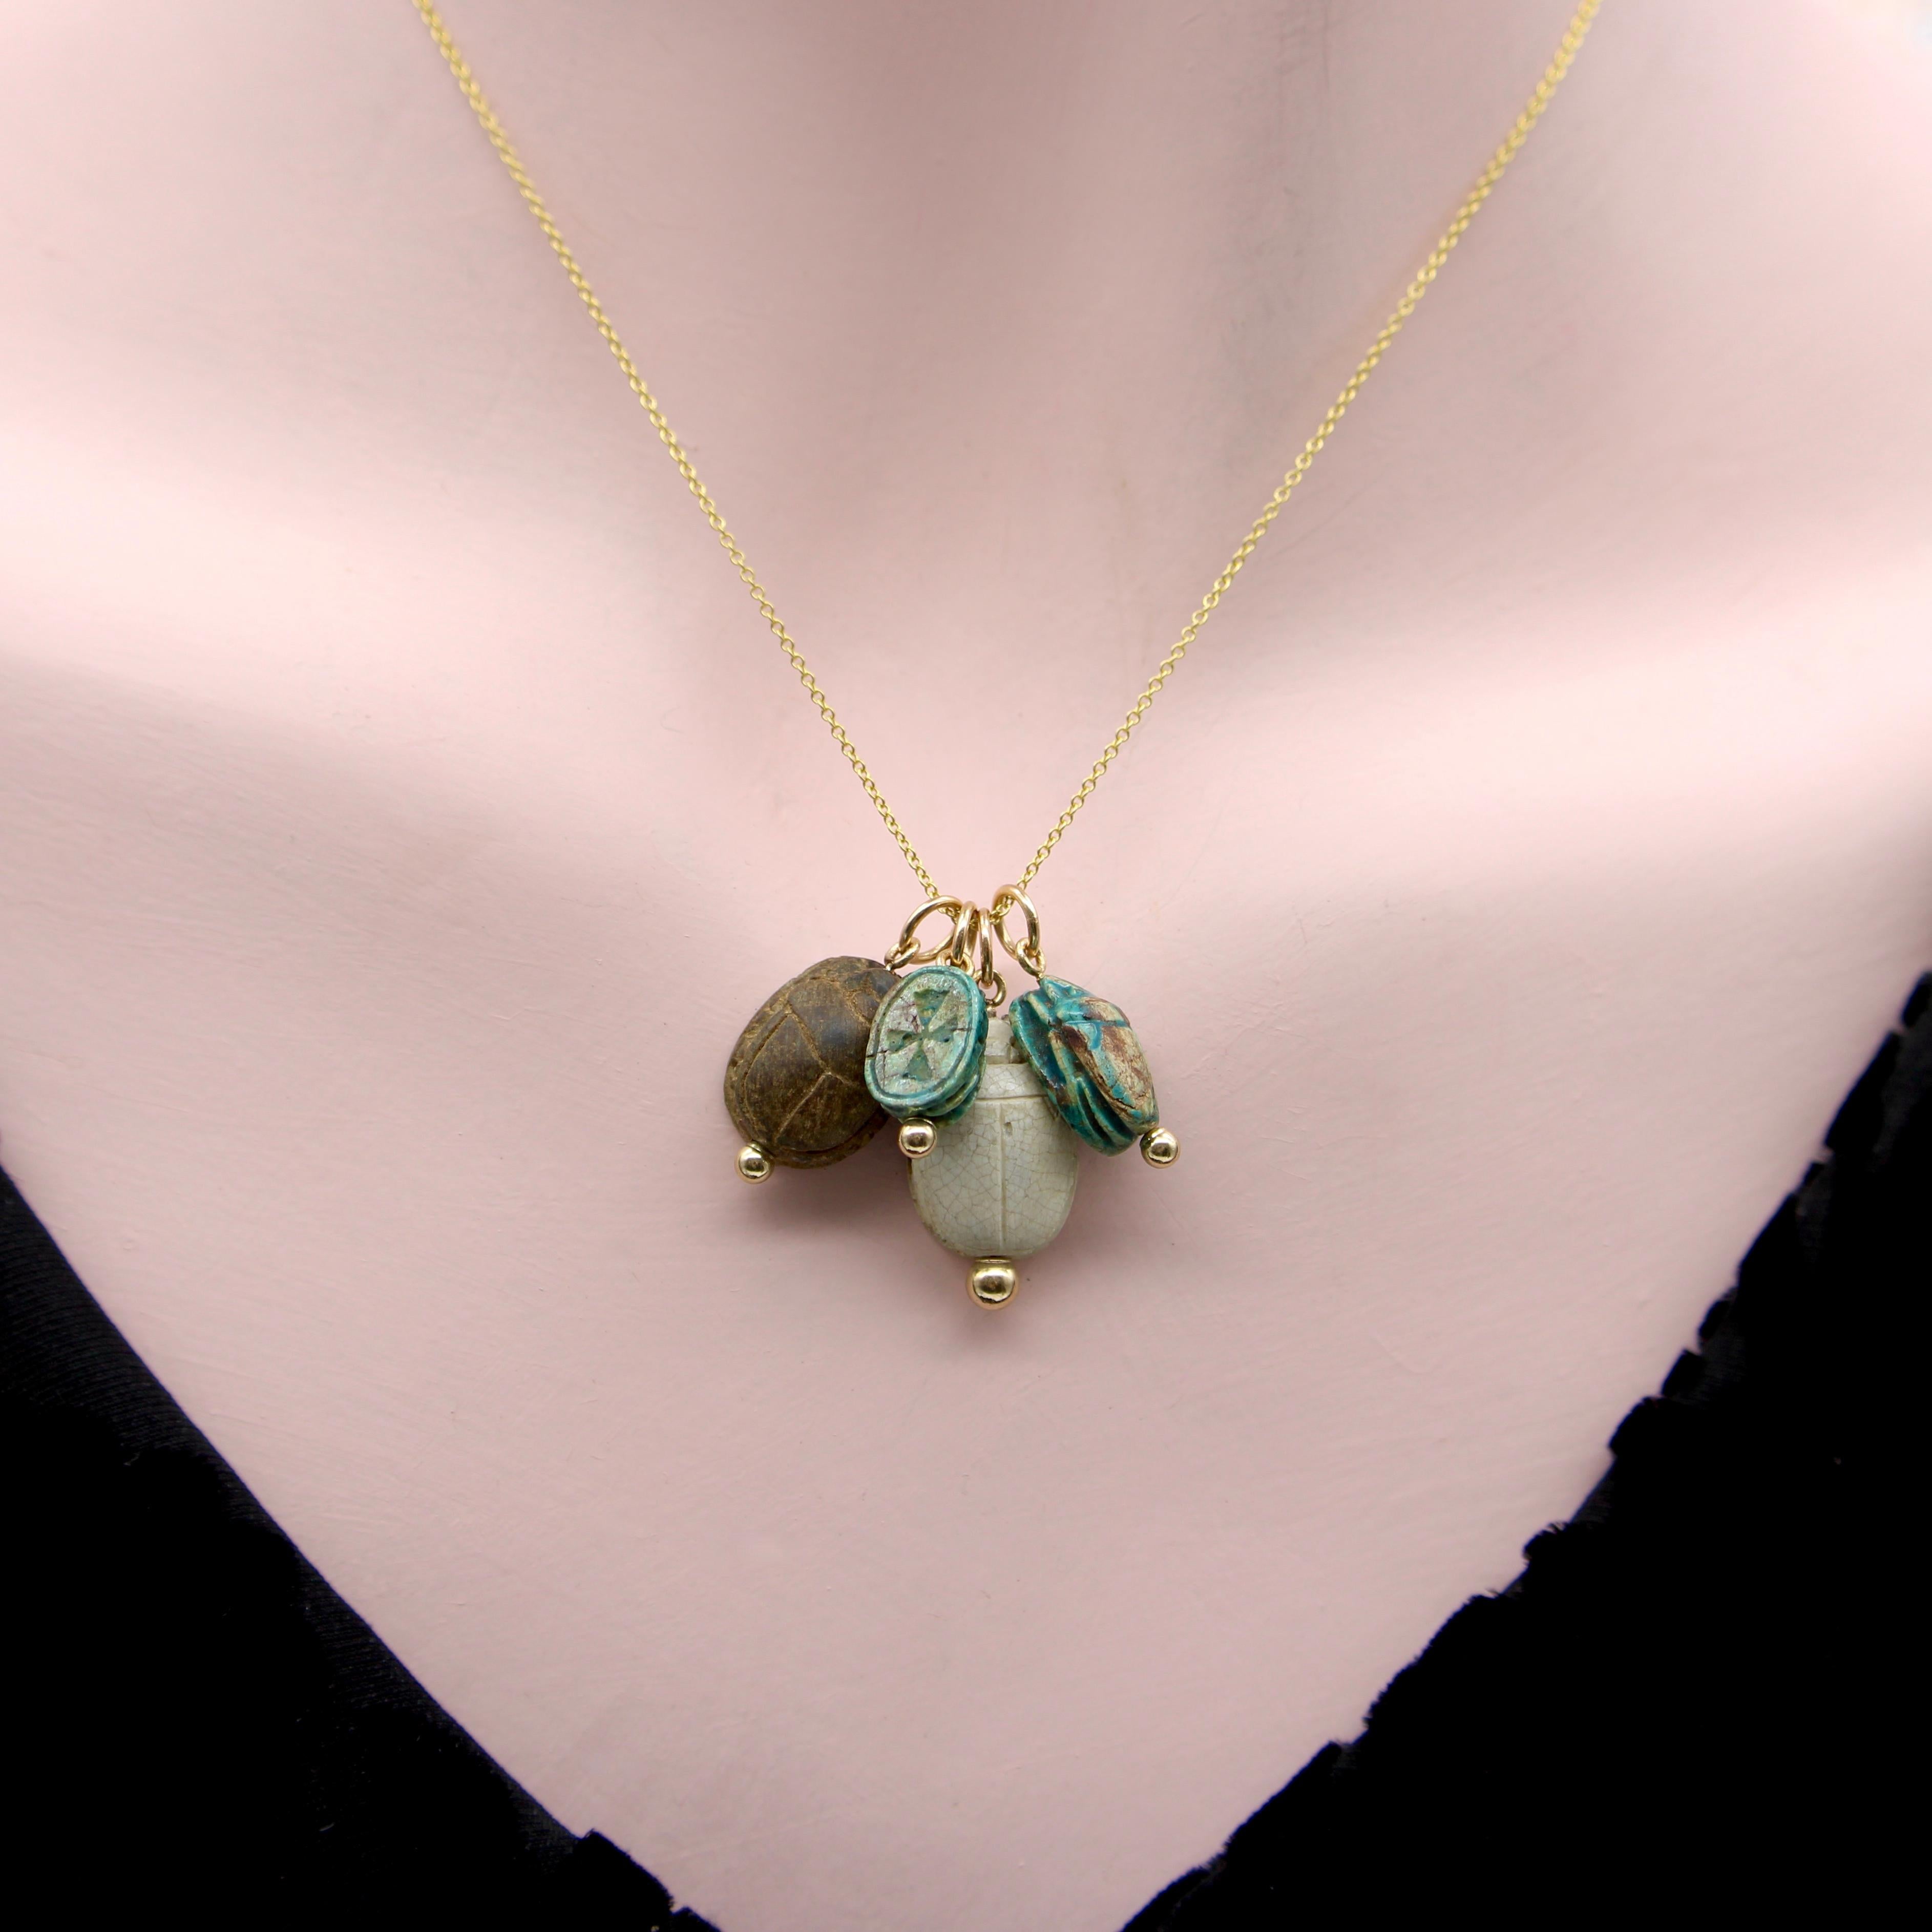 Egyptian Revival Beige Faience Scarab Pendant with 14K Gold Mount  For Sale 4